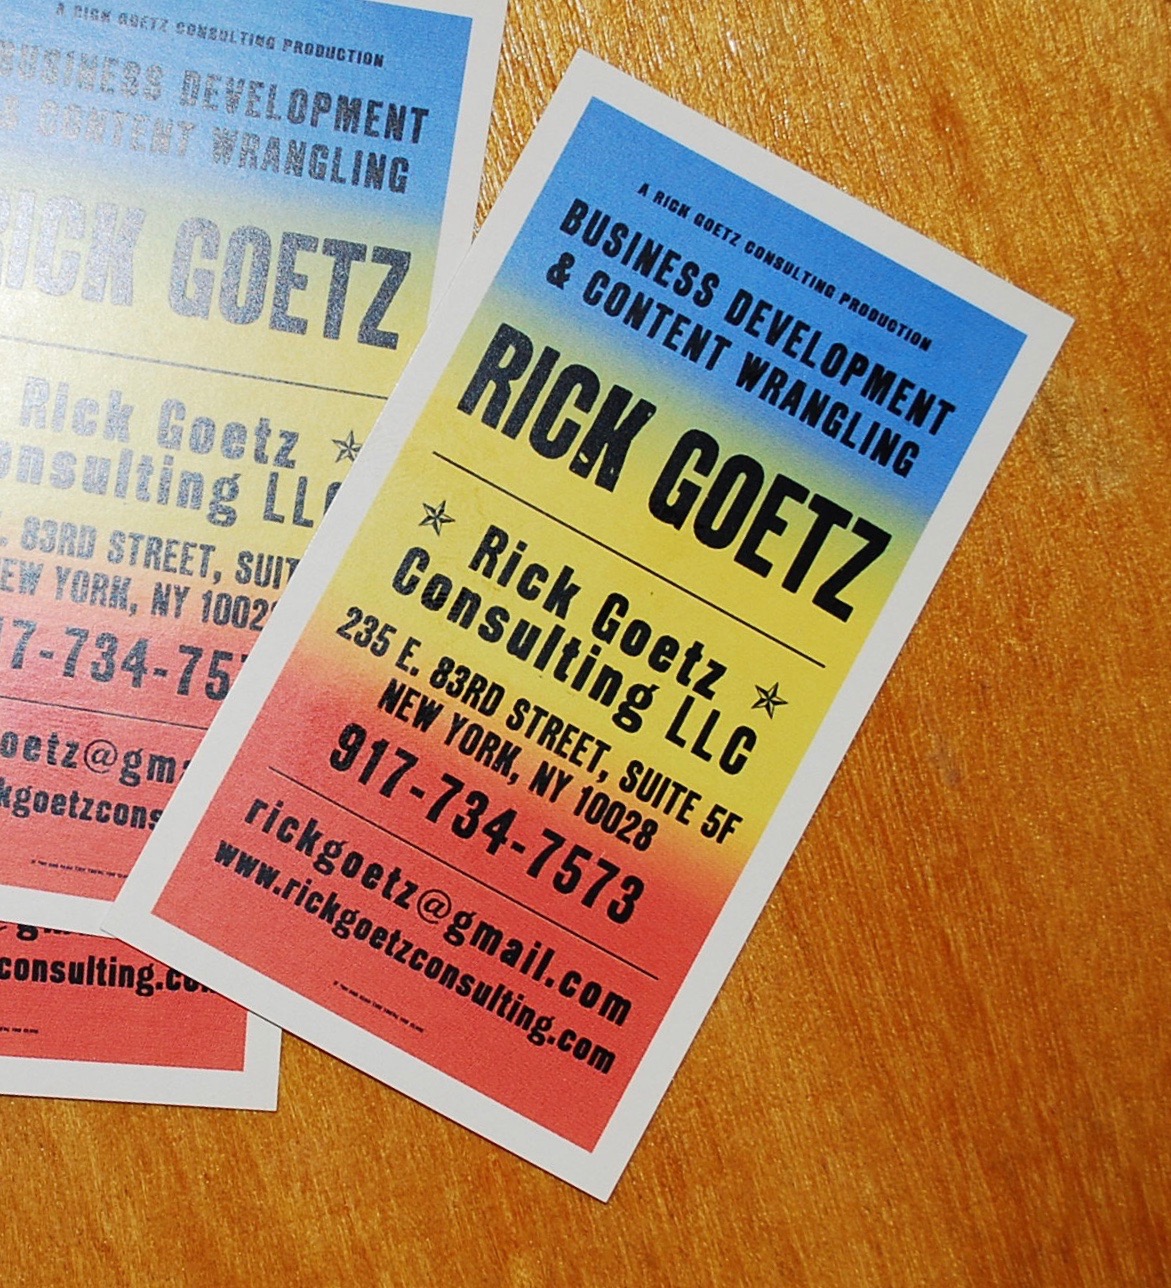 Business card design for a New York City music consultant.